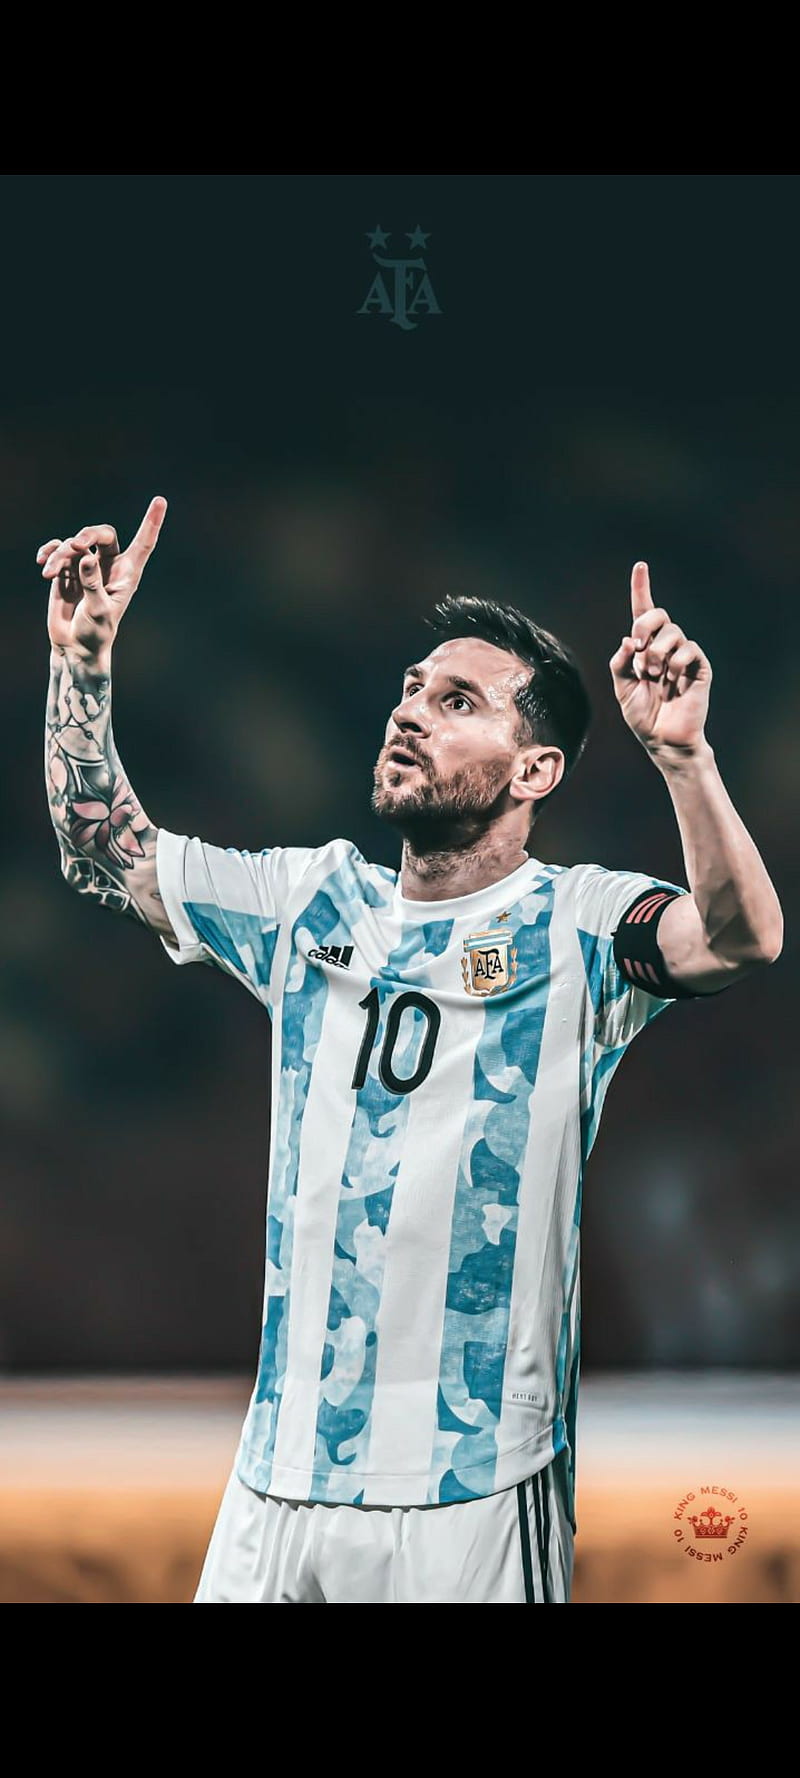 200+] Messi Wallpapers | Wallpapers.com